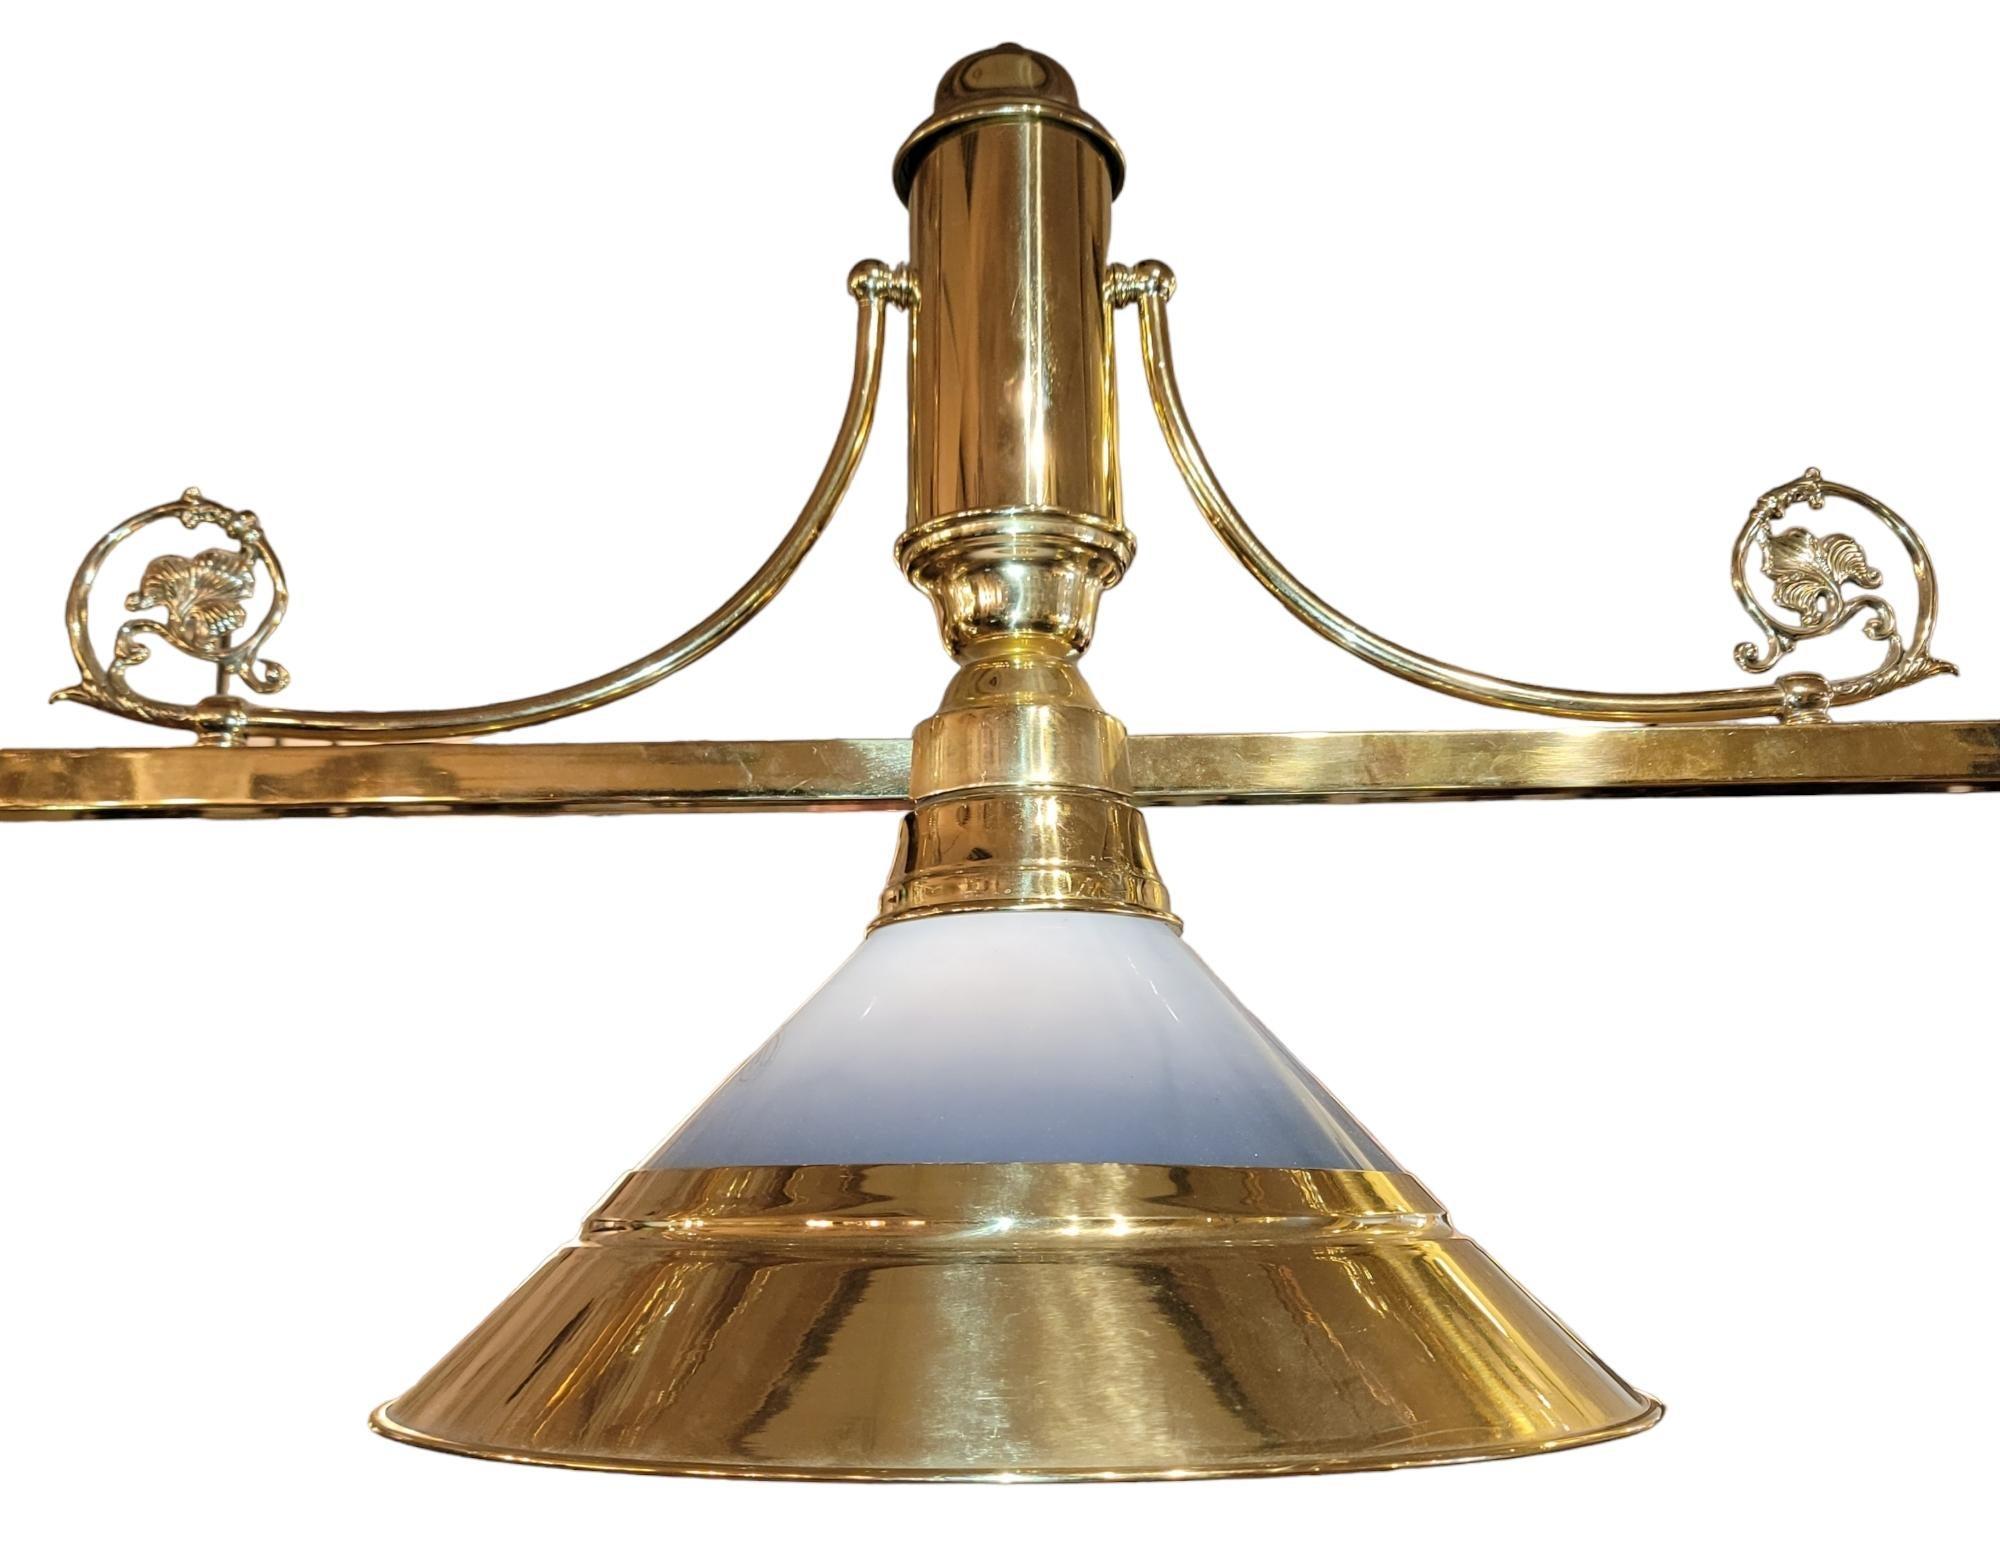 French brass three light Chandelier with a double chain hanging set up. Leaflet motif to the left and right of the center light. Each light is found to be in working order and depending on light can be very bright or dimly lit depending on the bulb